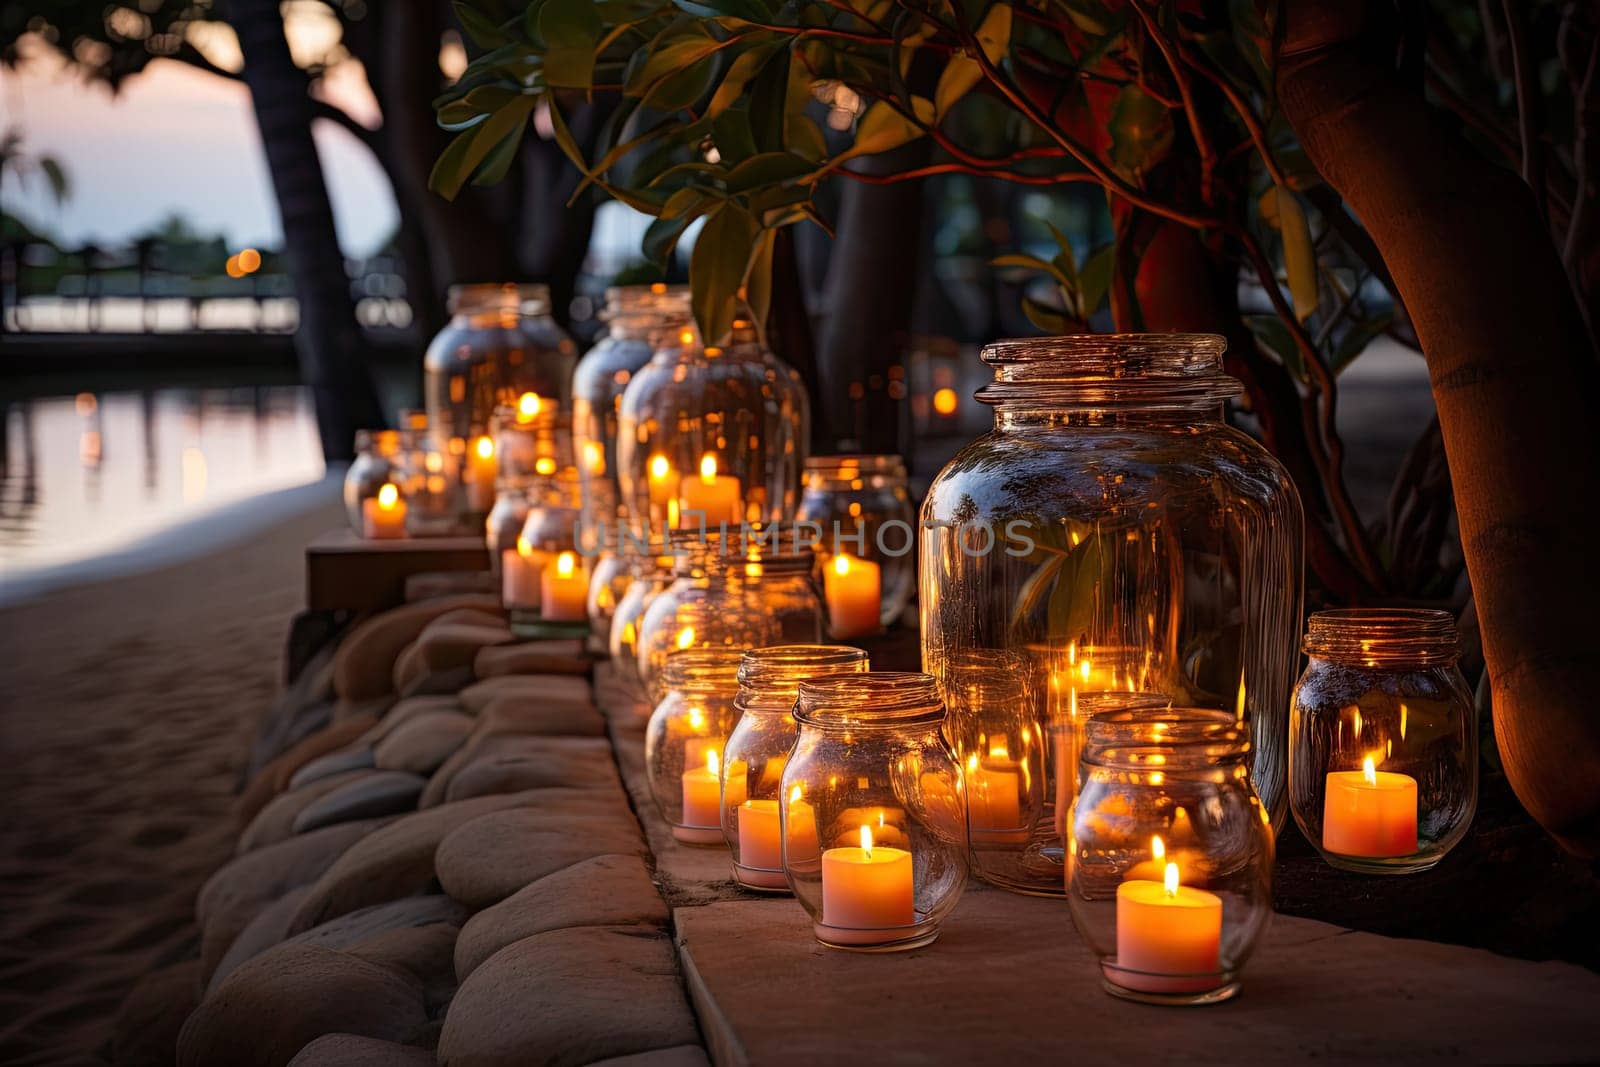 A Serene Glow: A Row of Illuminated Glass Jars Filled with Warm, Flickering Candles